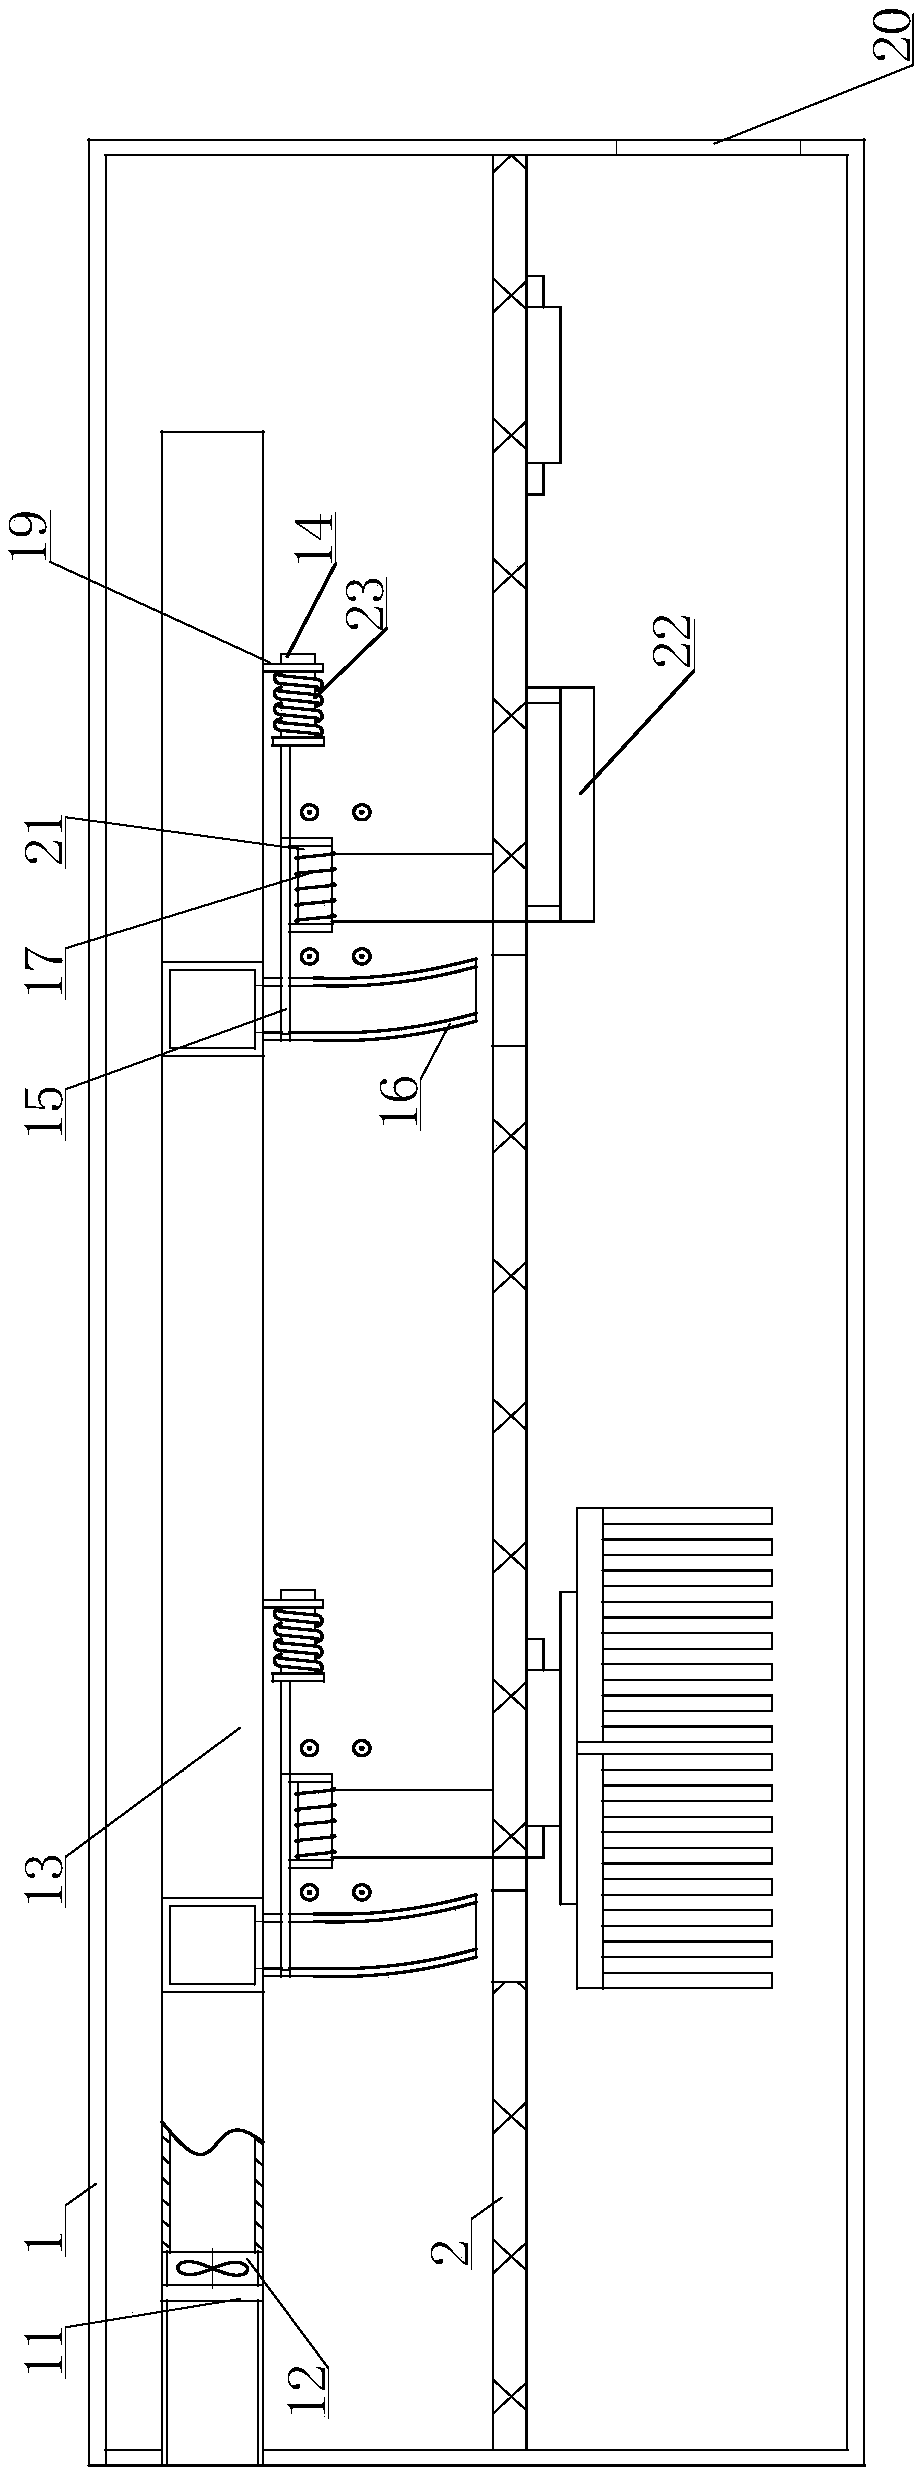 VR-based power simulation teaching system and teaching method